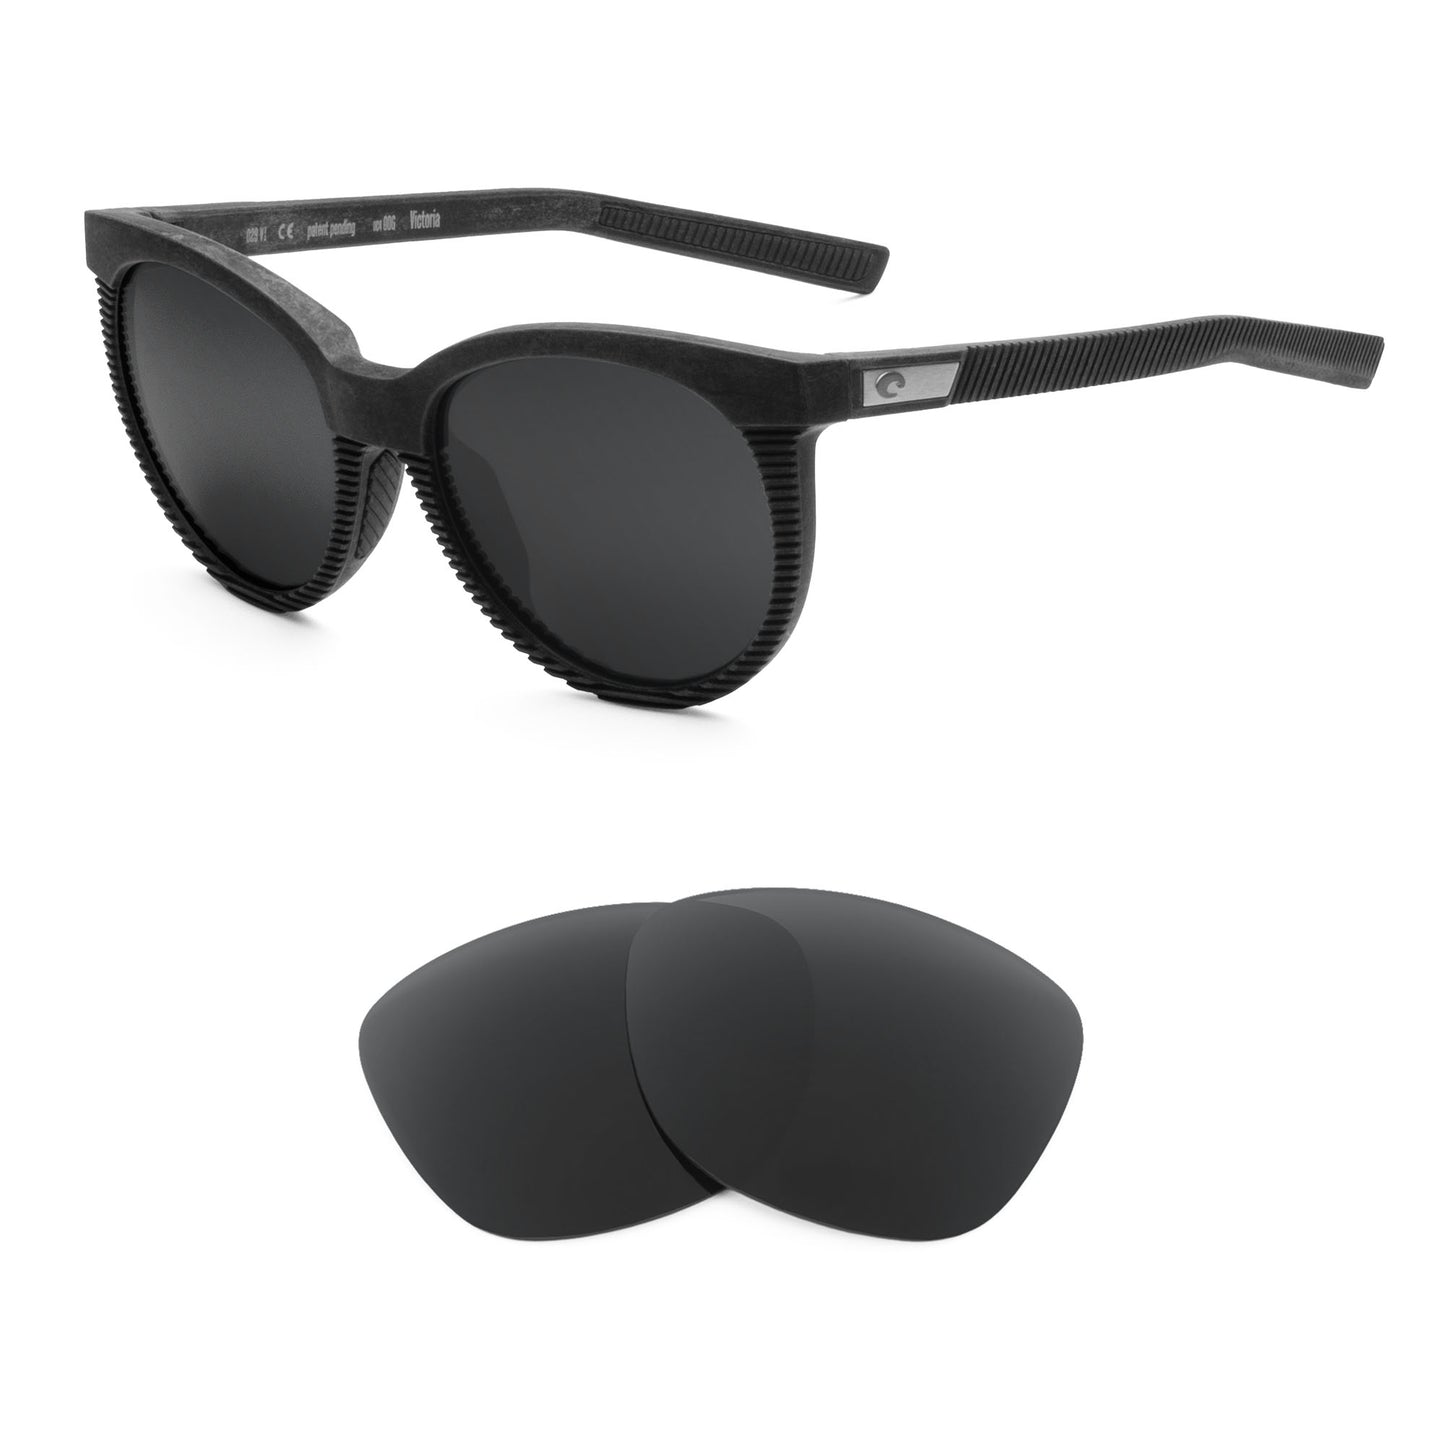 Costa Victoria sunglasses with replacement lenses